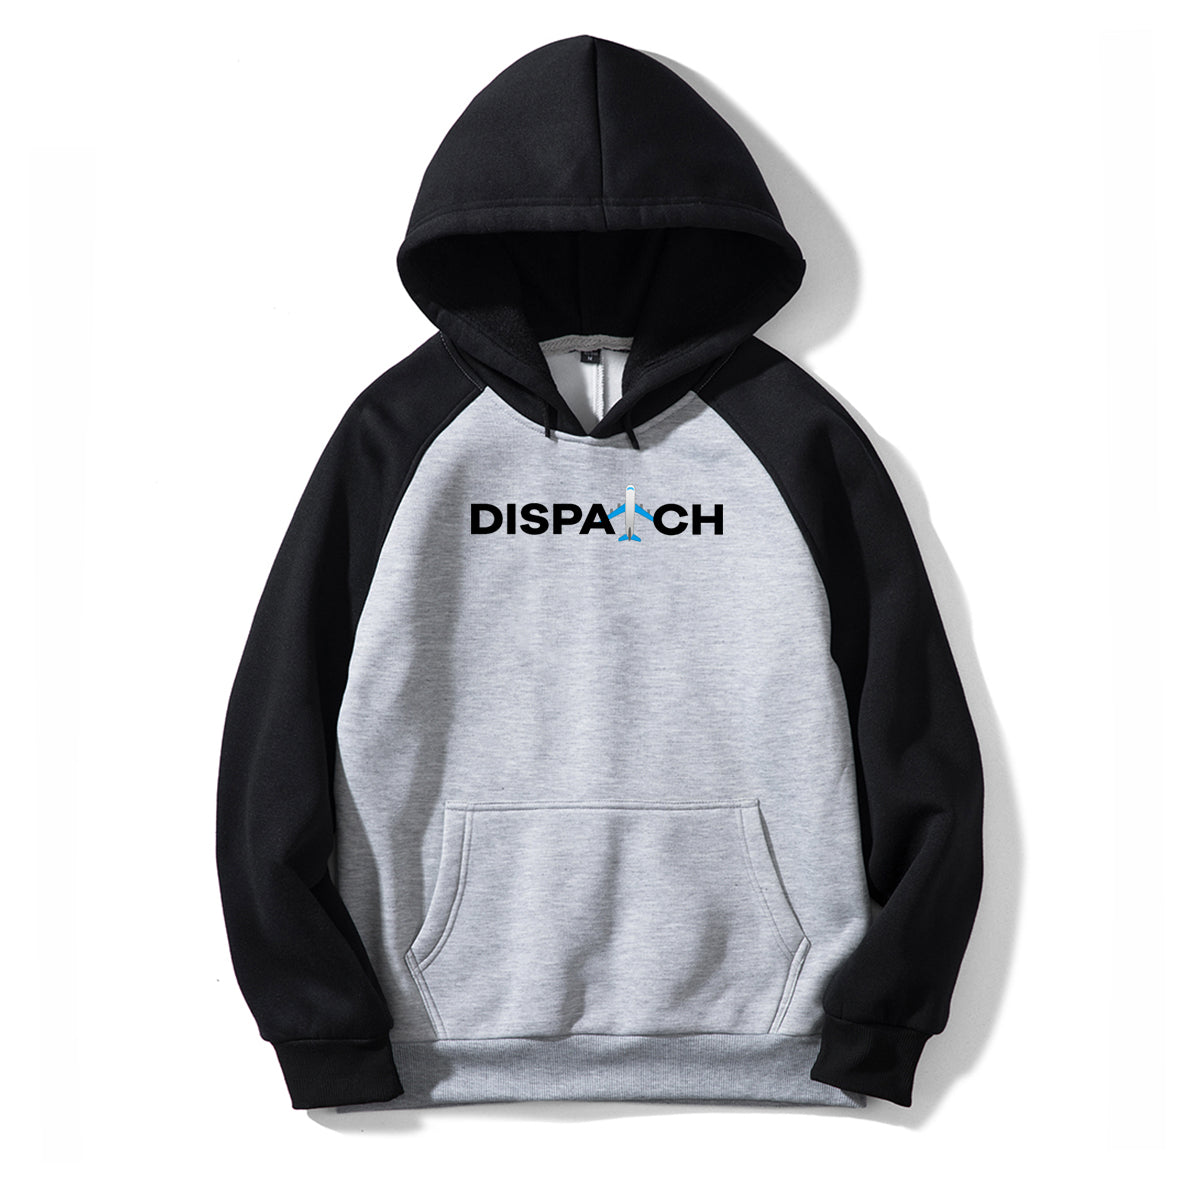 Dispatch Designed Colourful Hoodies